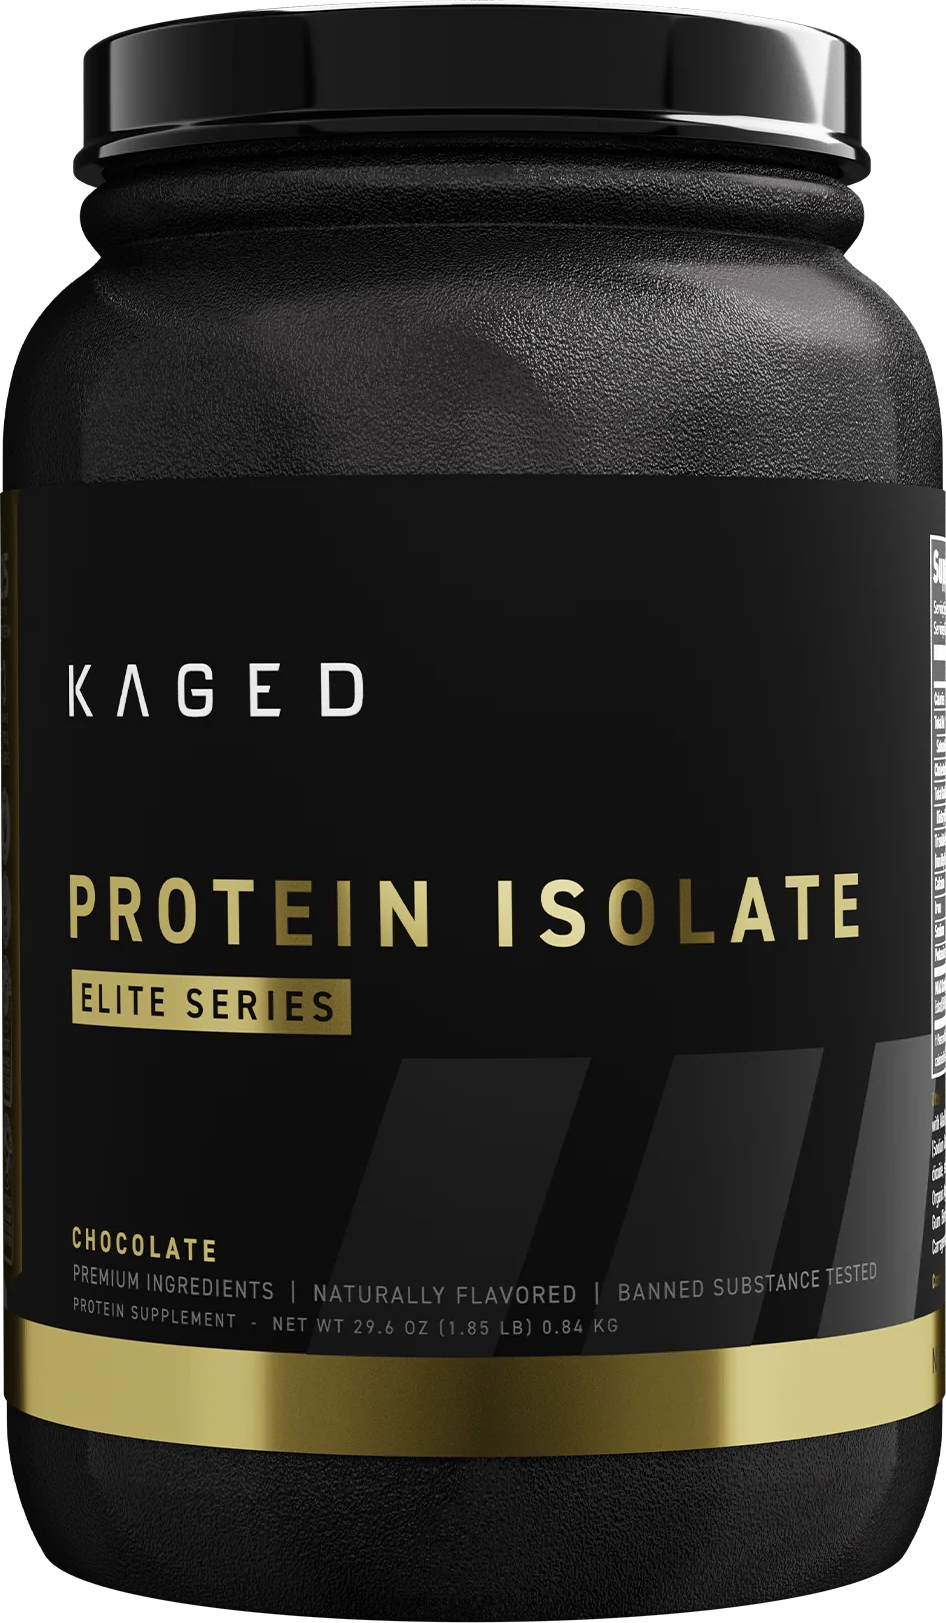 https://www.priceplow.com/static/images/products/kaged-protein-isolate-elite.png